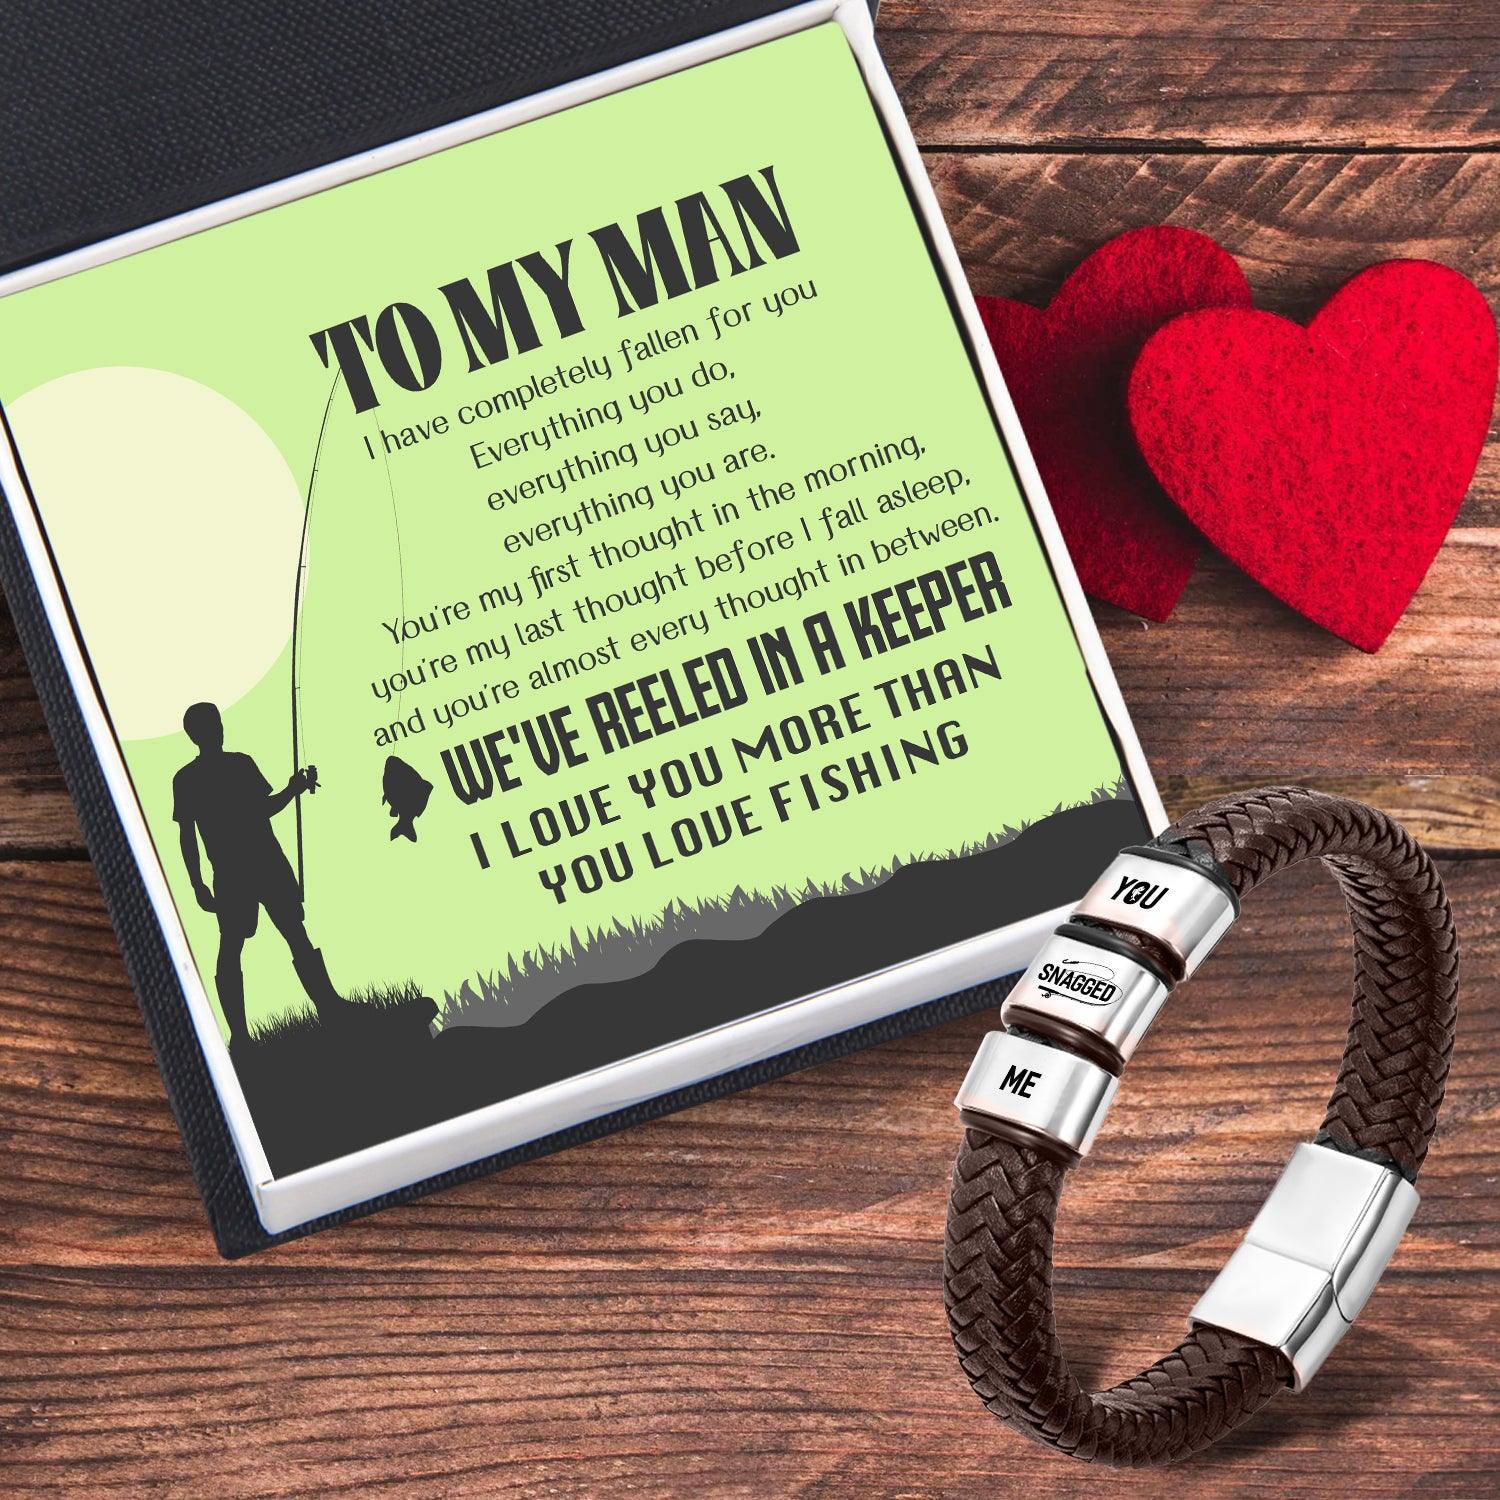 Leather Bracelet - Fishing - To My Man - I Love You More Than You